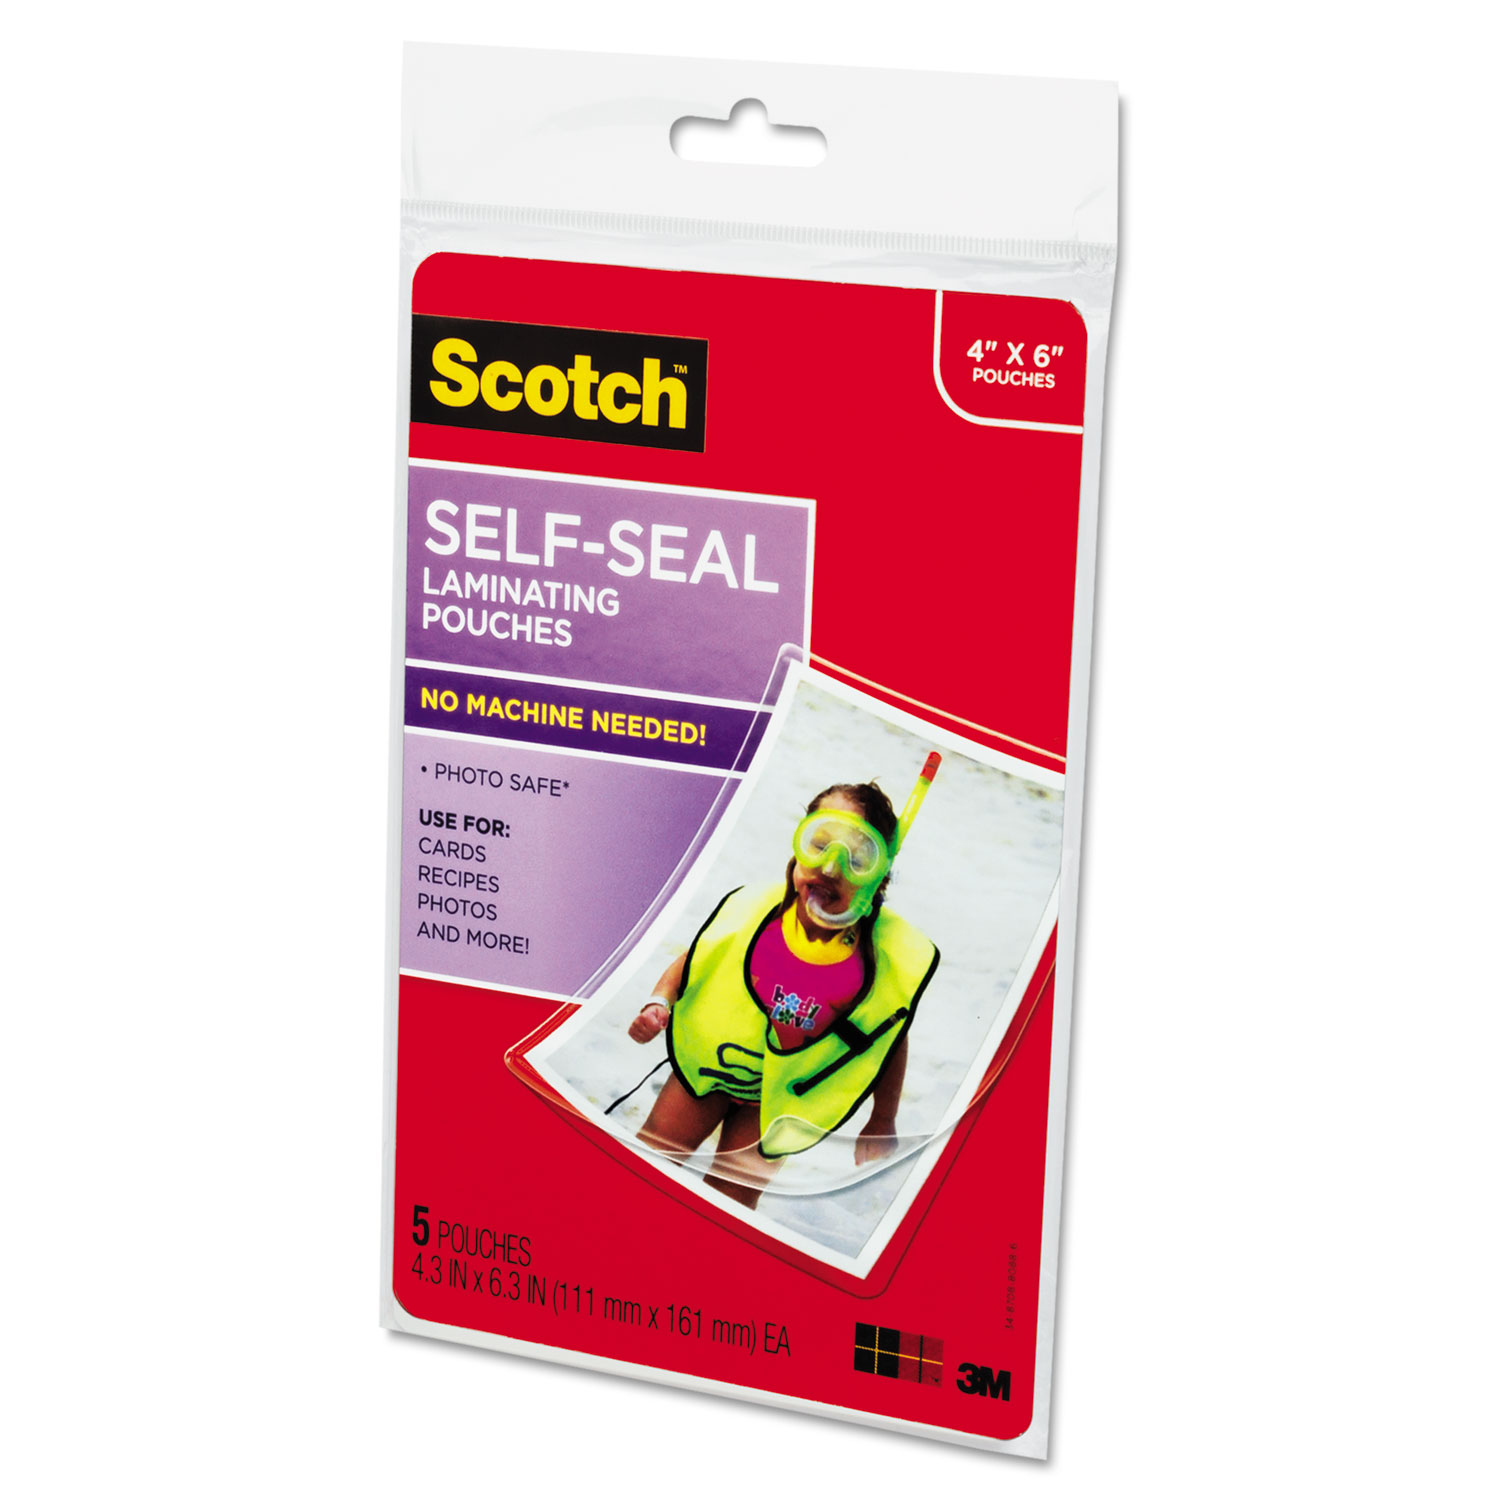 Self-Sealing Laminating Pouches, 9.5 mil, 4 3/8 x 6 3/8, Photo Size, 5/Pack